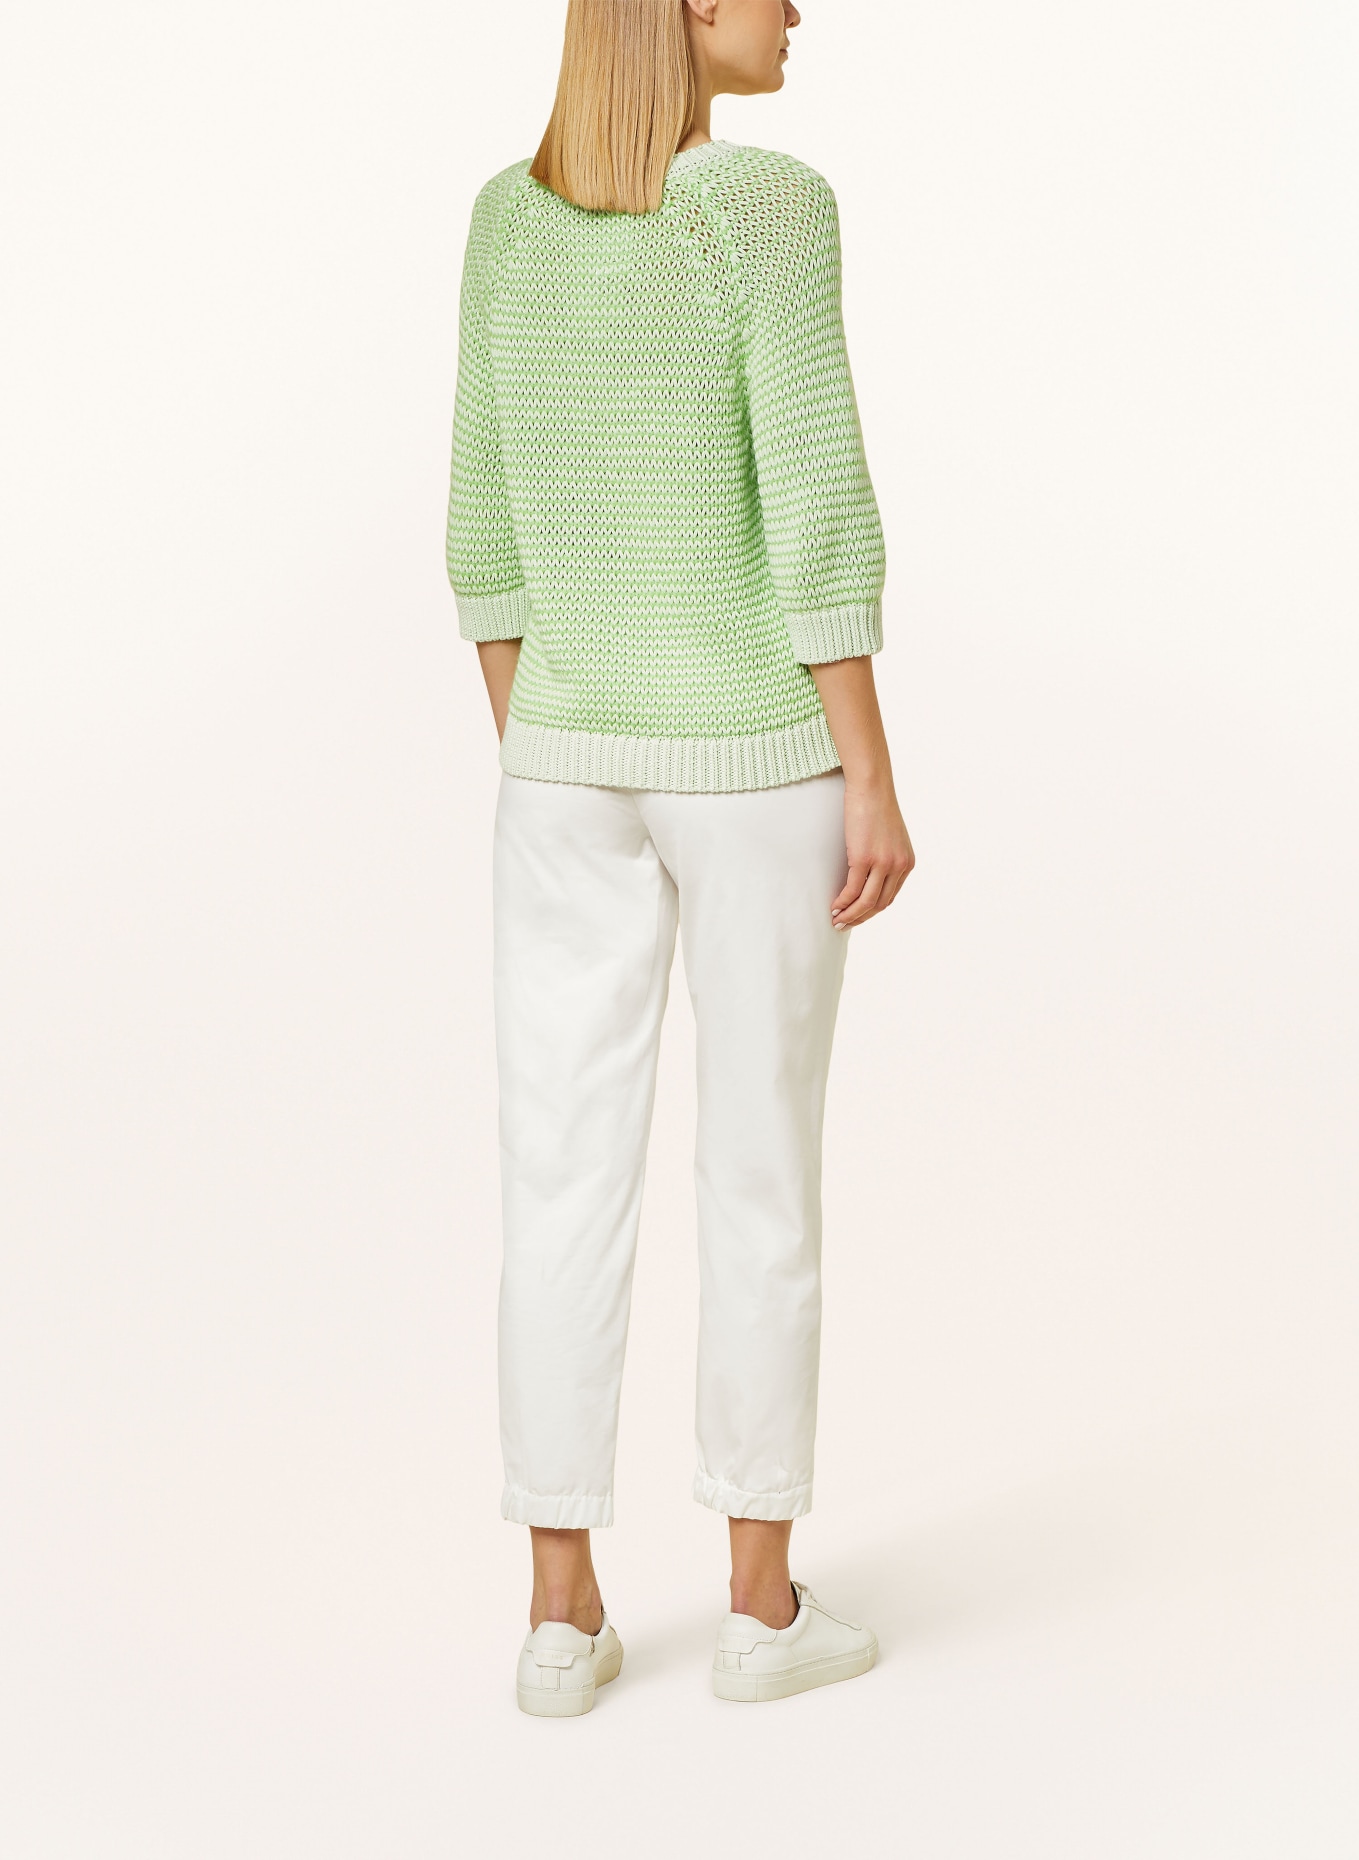 CINQUE Sweater CIANJE with 3/4 sleeves, Color: LIGHT GREEN (Image 3)